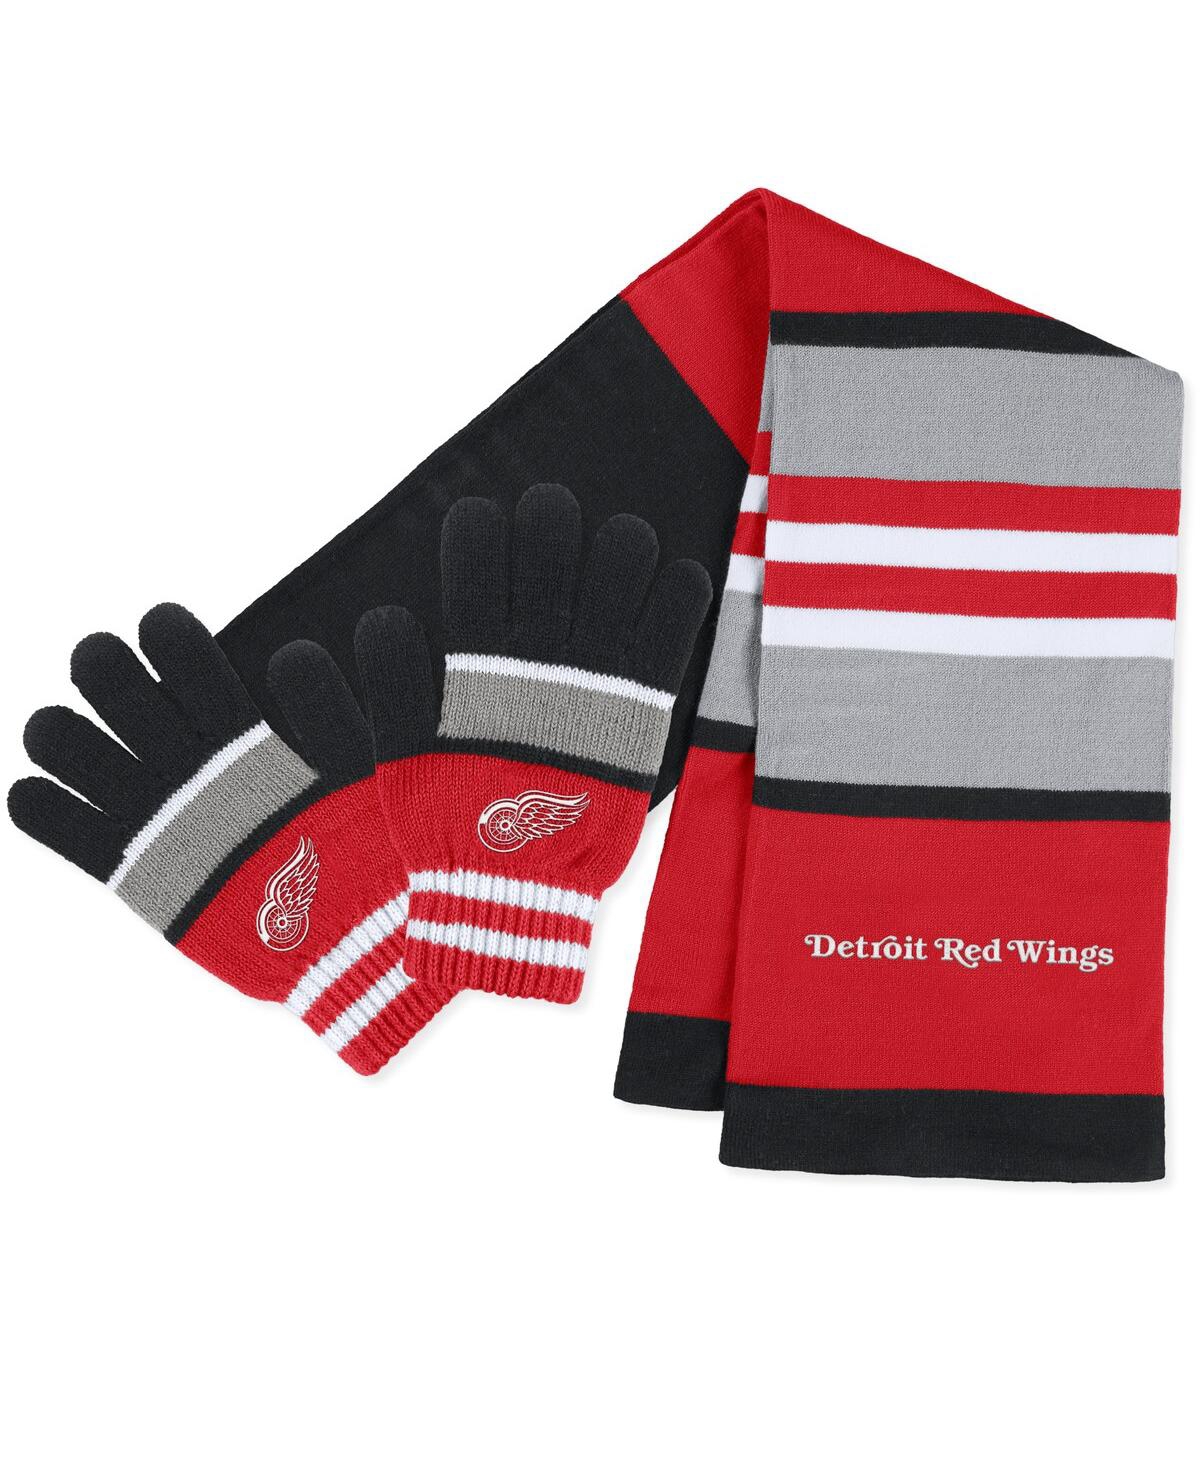 Wear By Erin Andrews Women's  Detroit Red Wings Stripe Glove And Scarf Set In Black,red